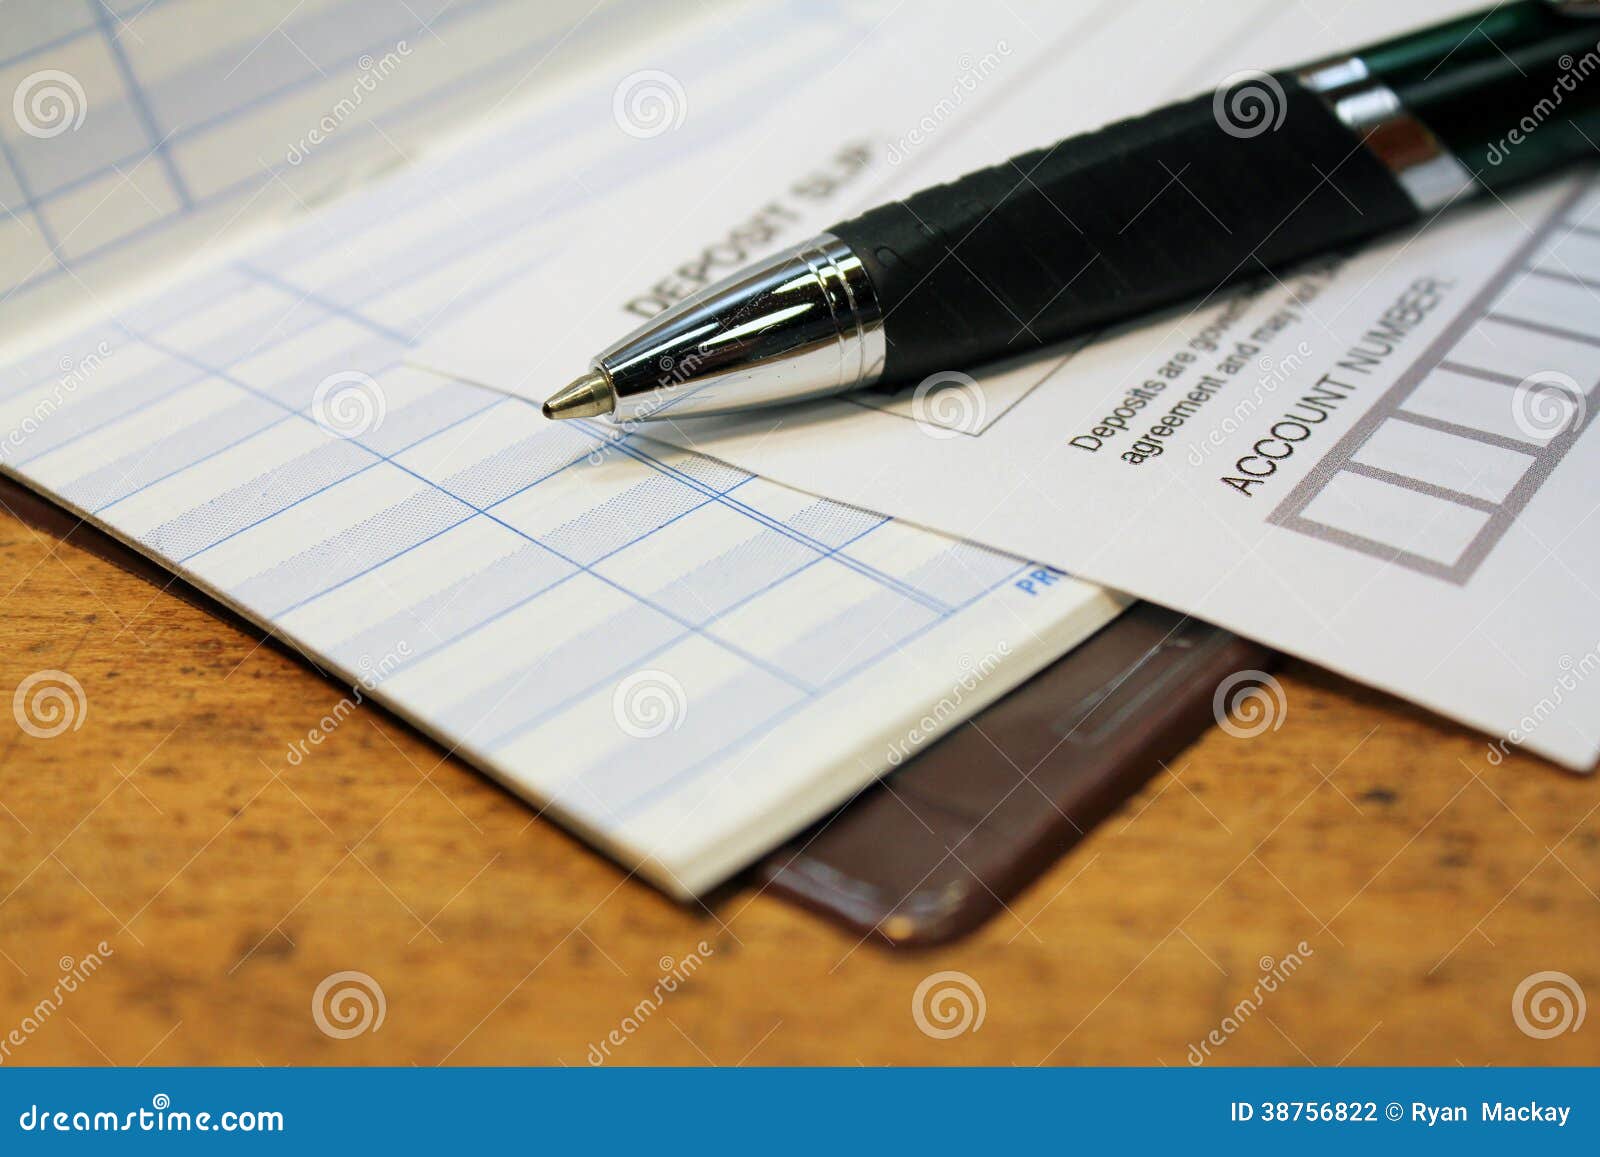 in terms of Fourth National census Deposit Slip with Check Ledger Stock Photo - Image of register, accounts:  38756822